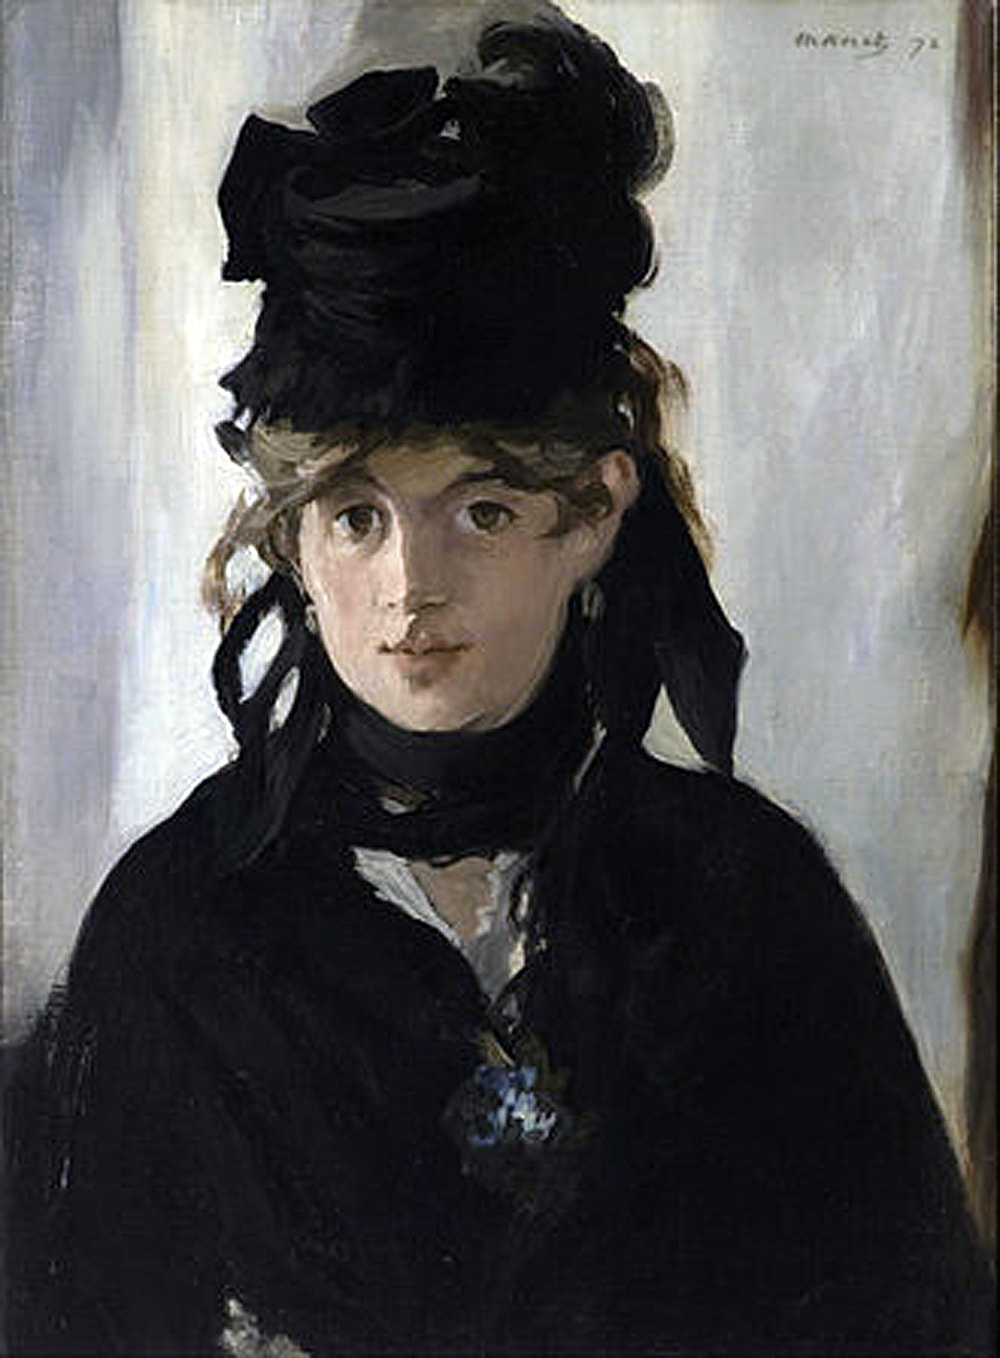 Painting by Edouard Manet